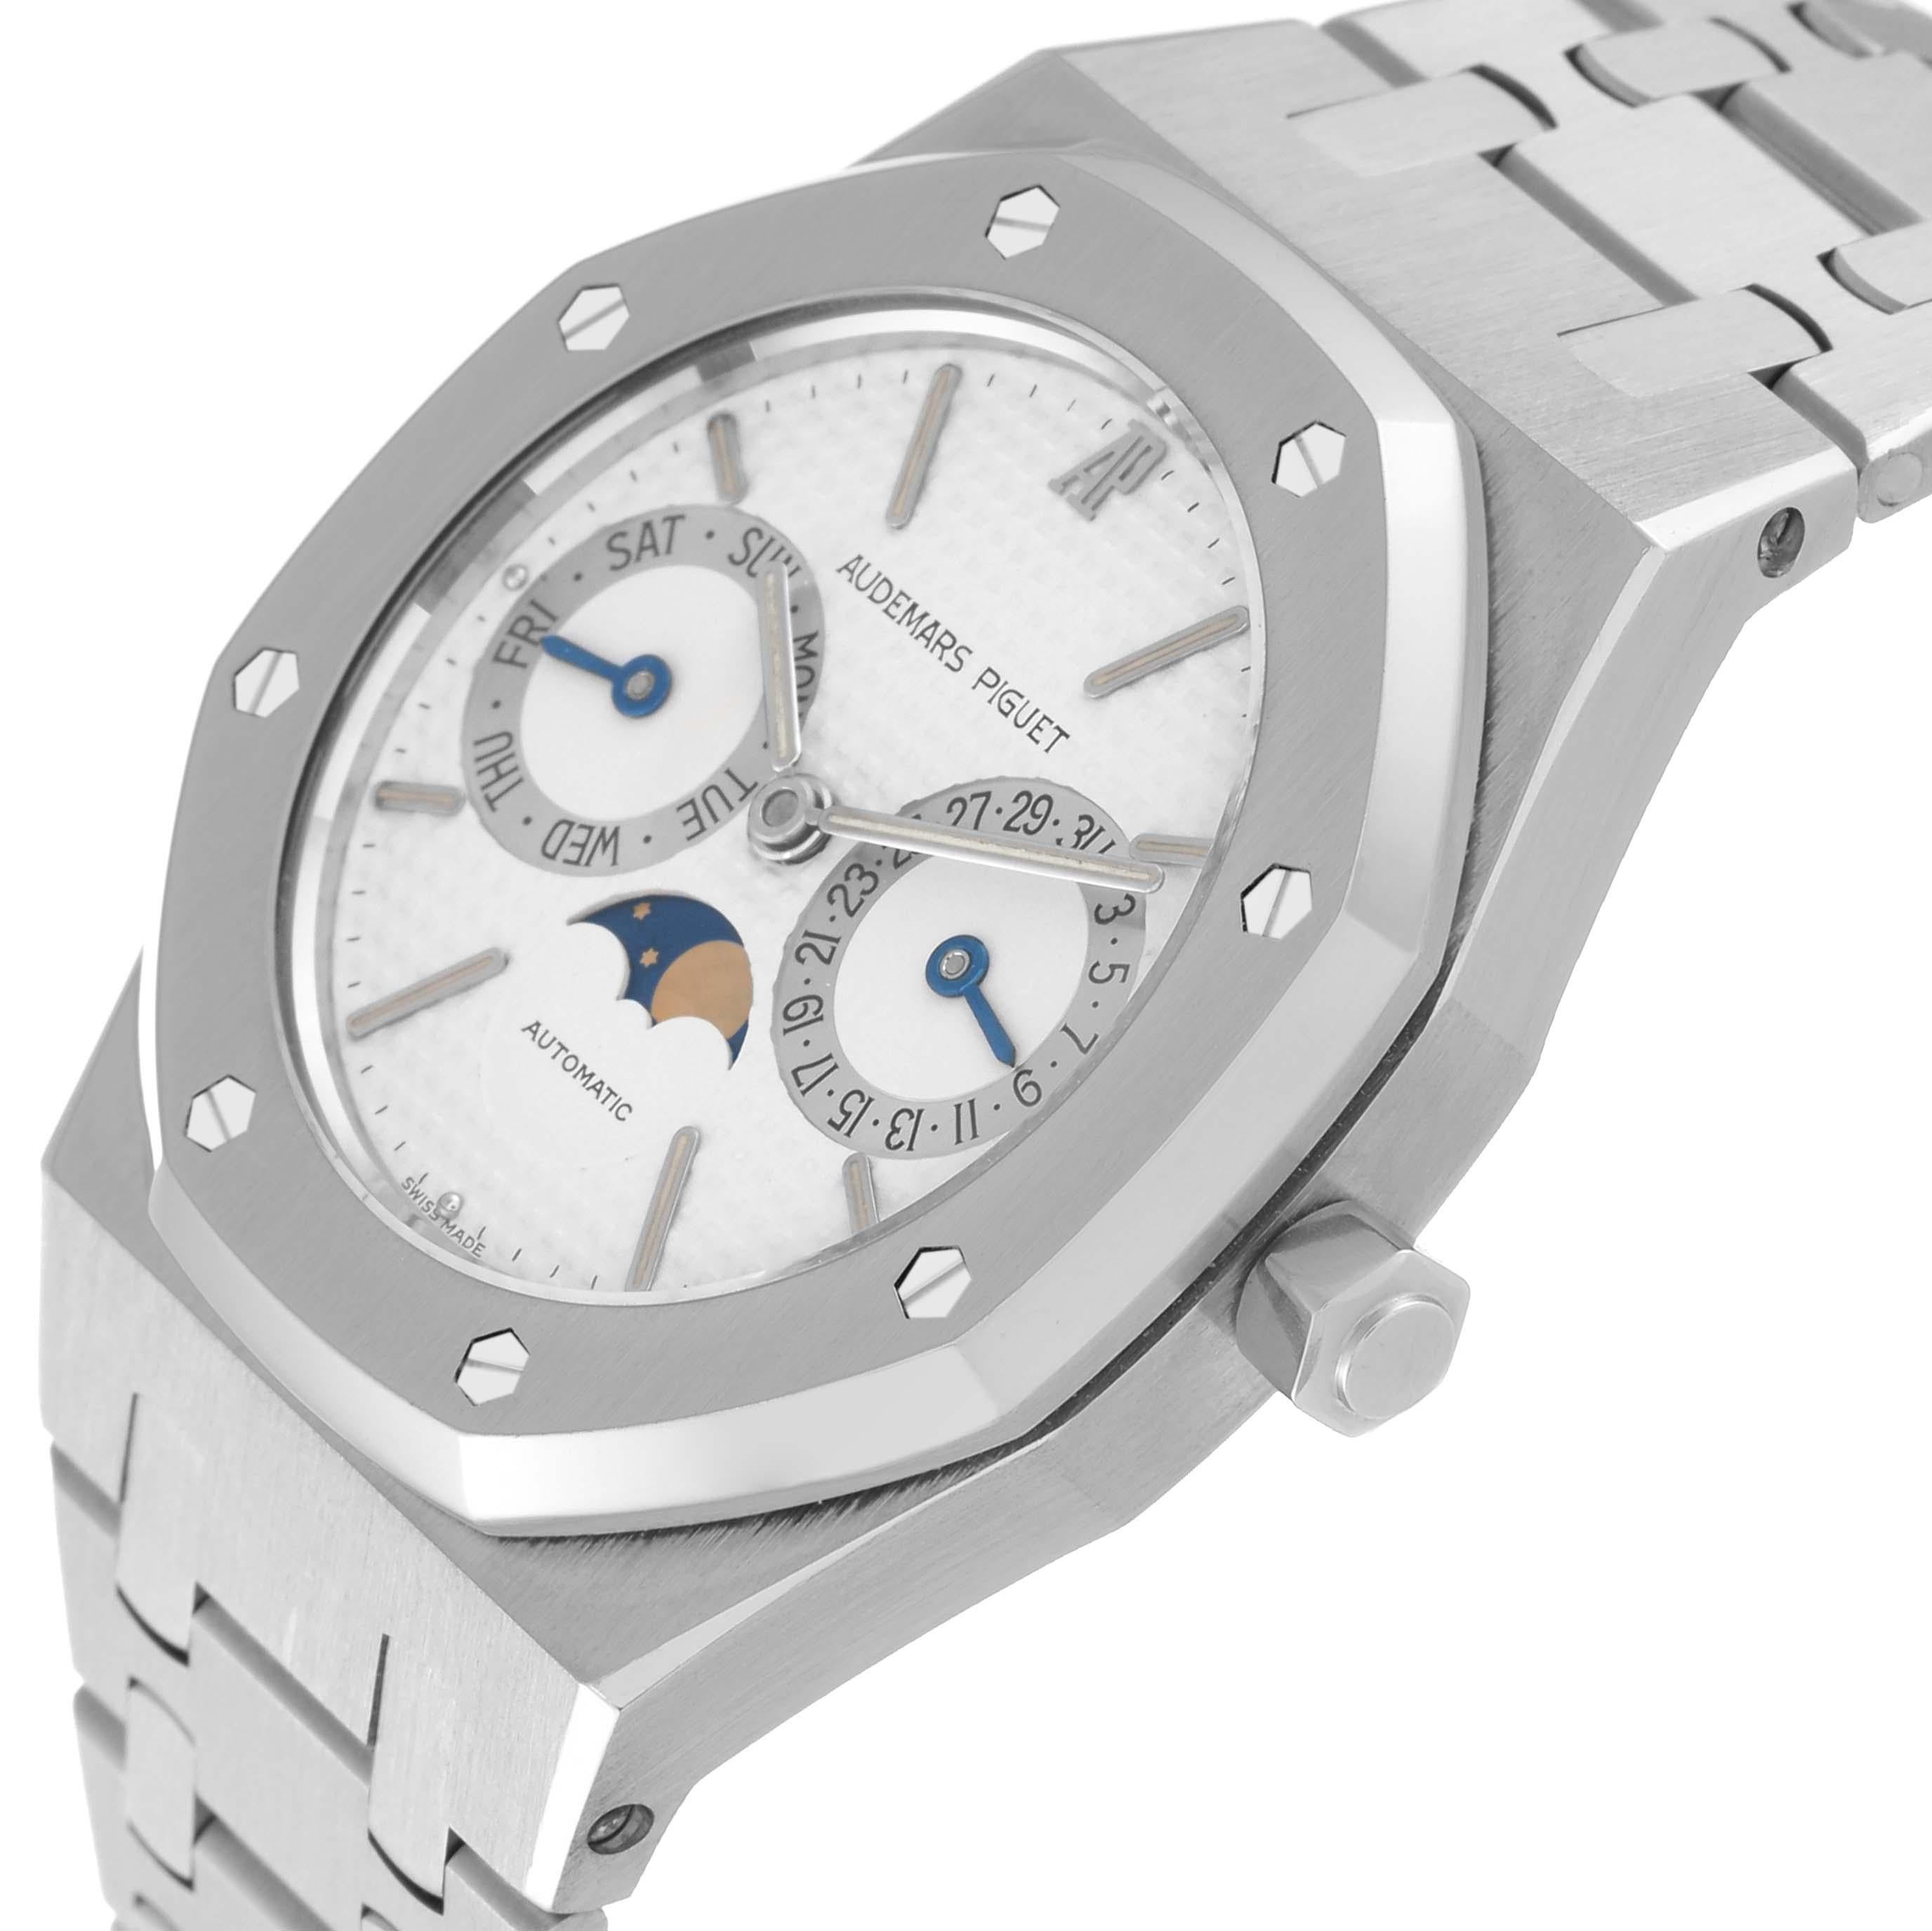 Audemars Piguet Royal Oak Day Date Moonphase Steel Mens Watch 25594ST. Automatic self-winding movement. Stainless steel case 36.0 mm in diameter. Stainless steel bezel punctuated with 8 signature screws. Scratch resistant sapphire crystal. White